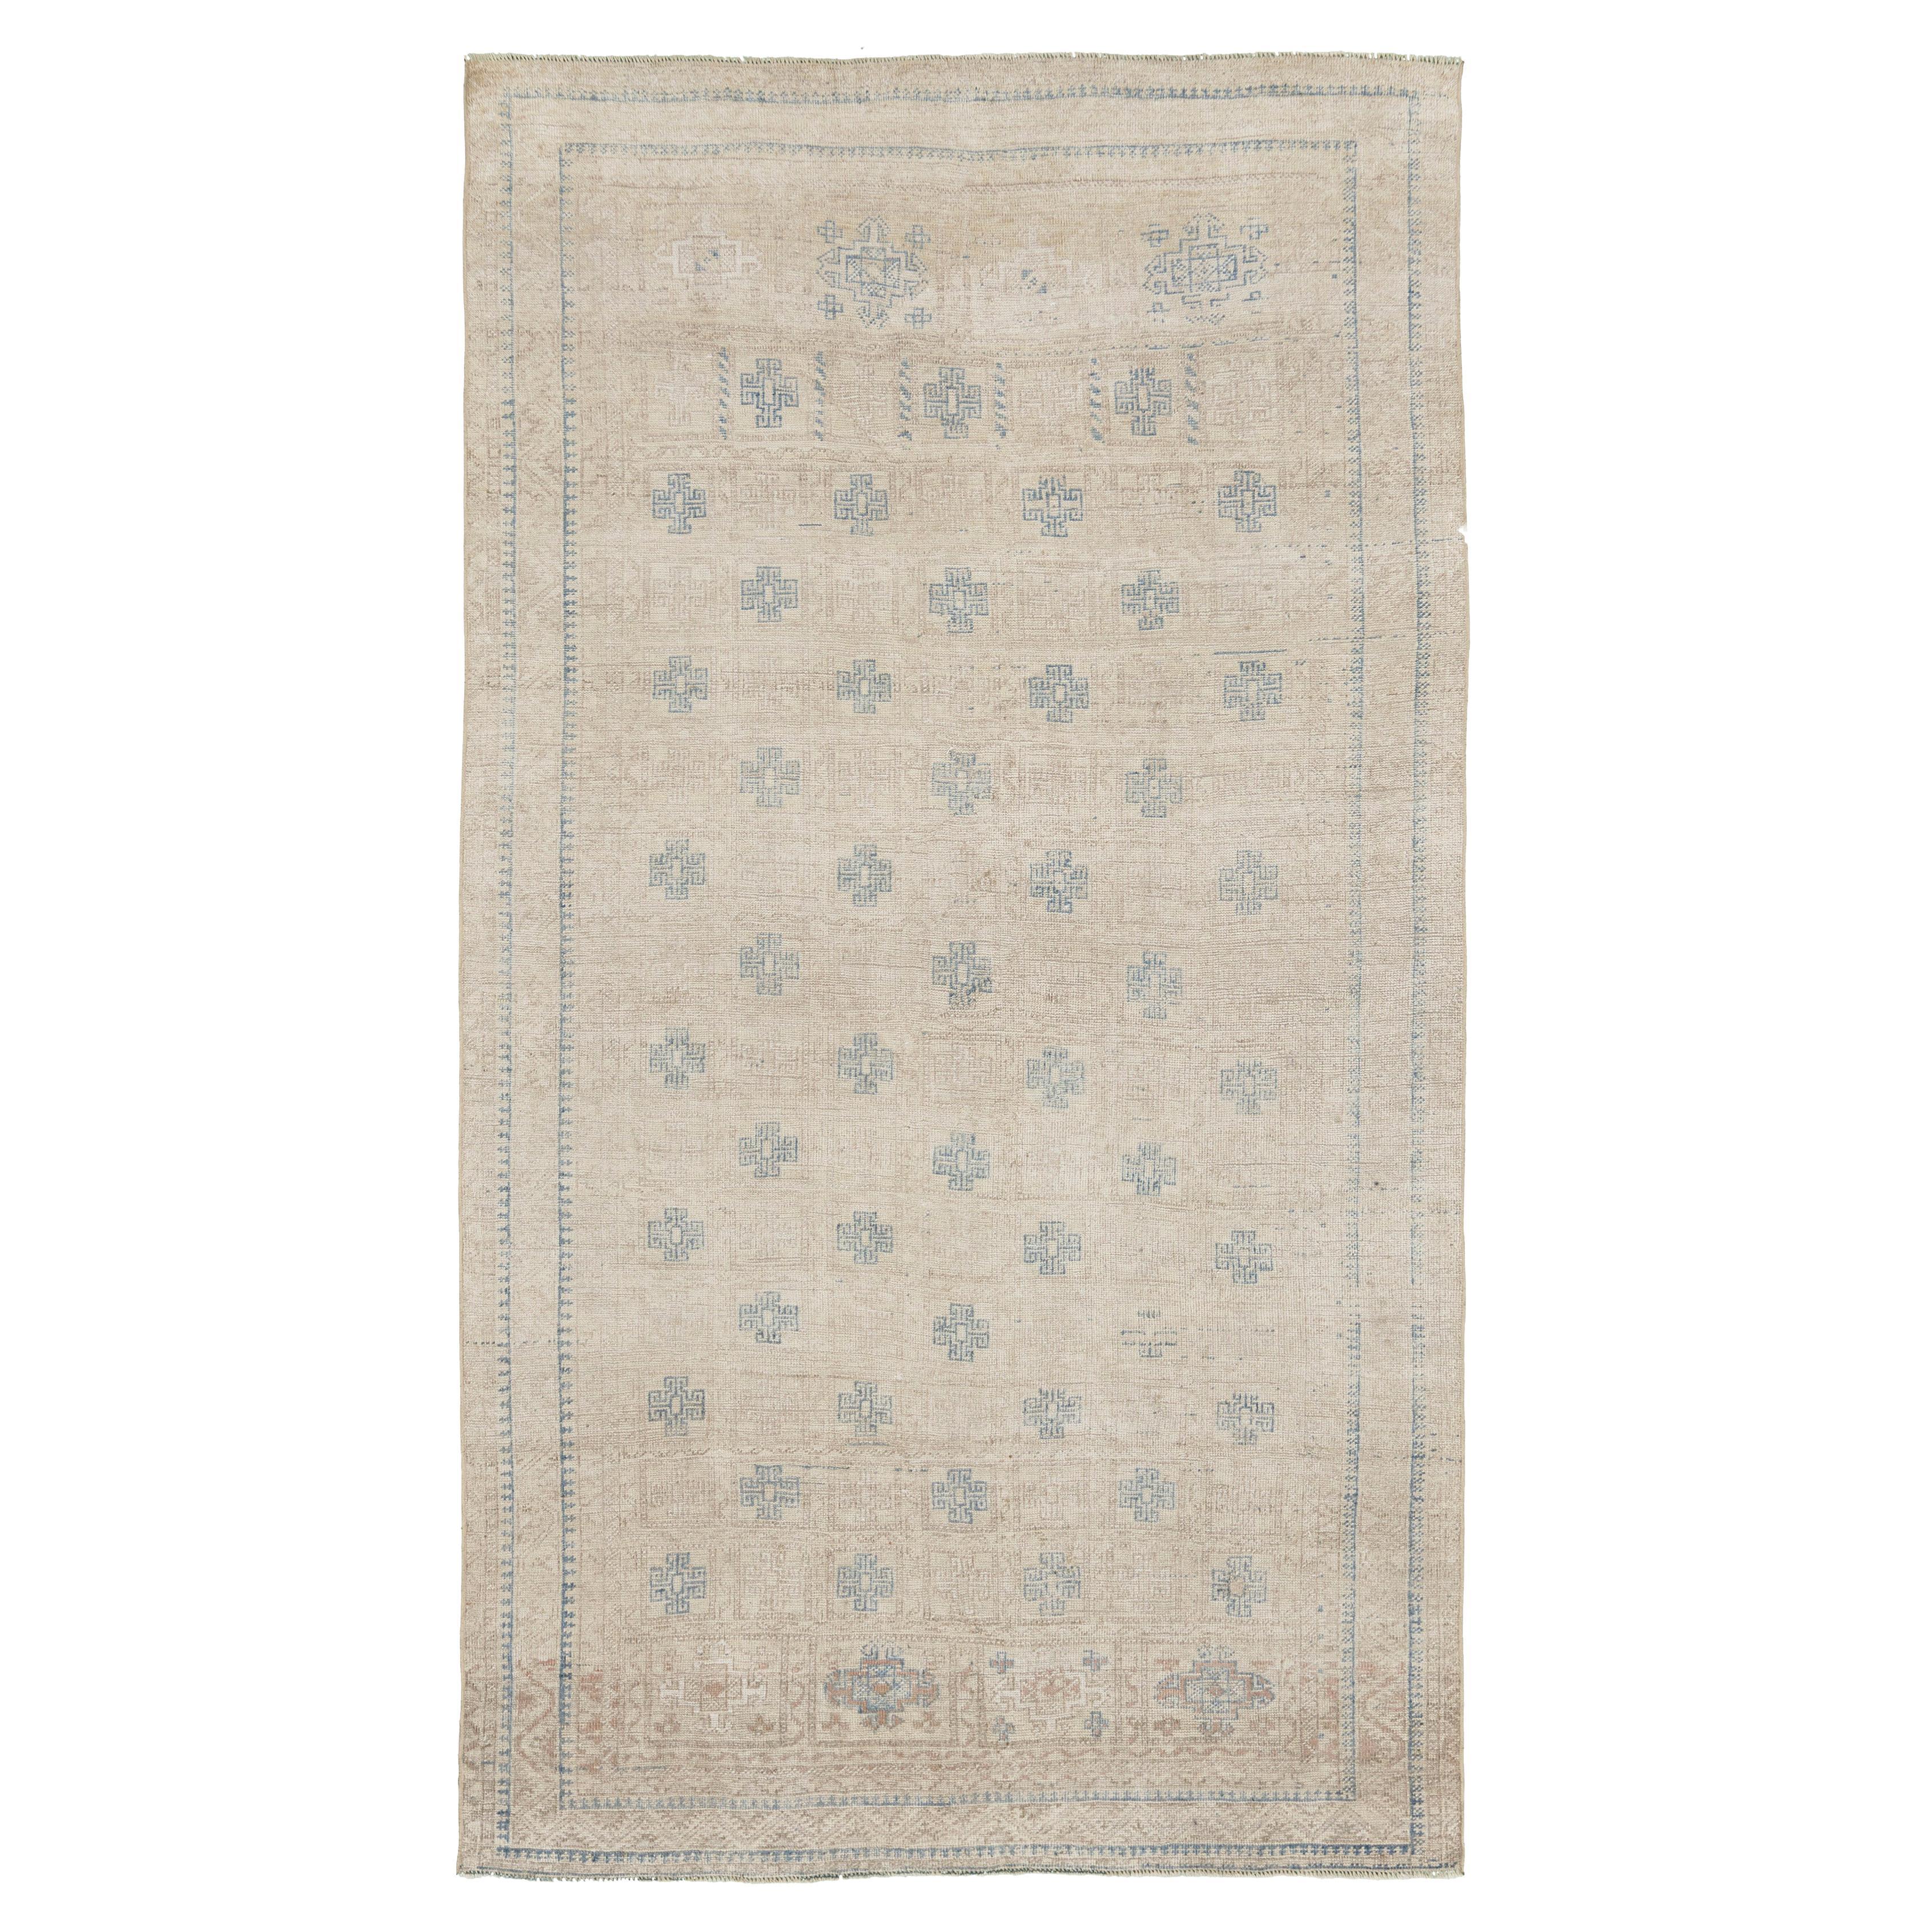 Antique Persian Beluch by Mehraban Rugs